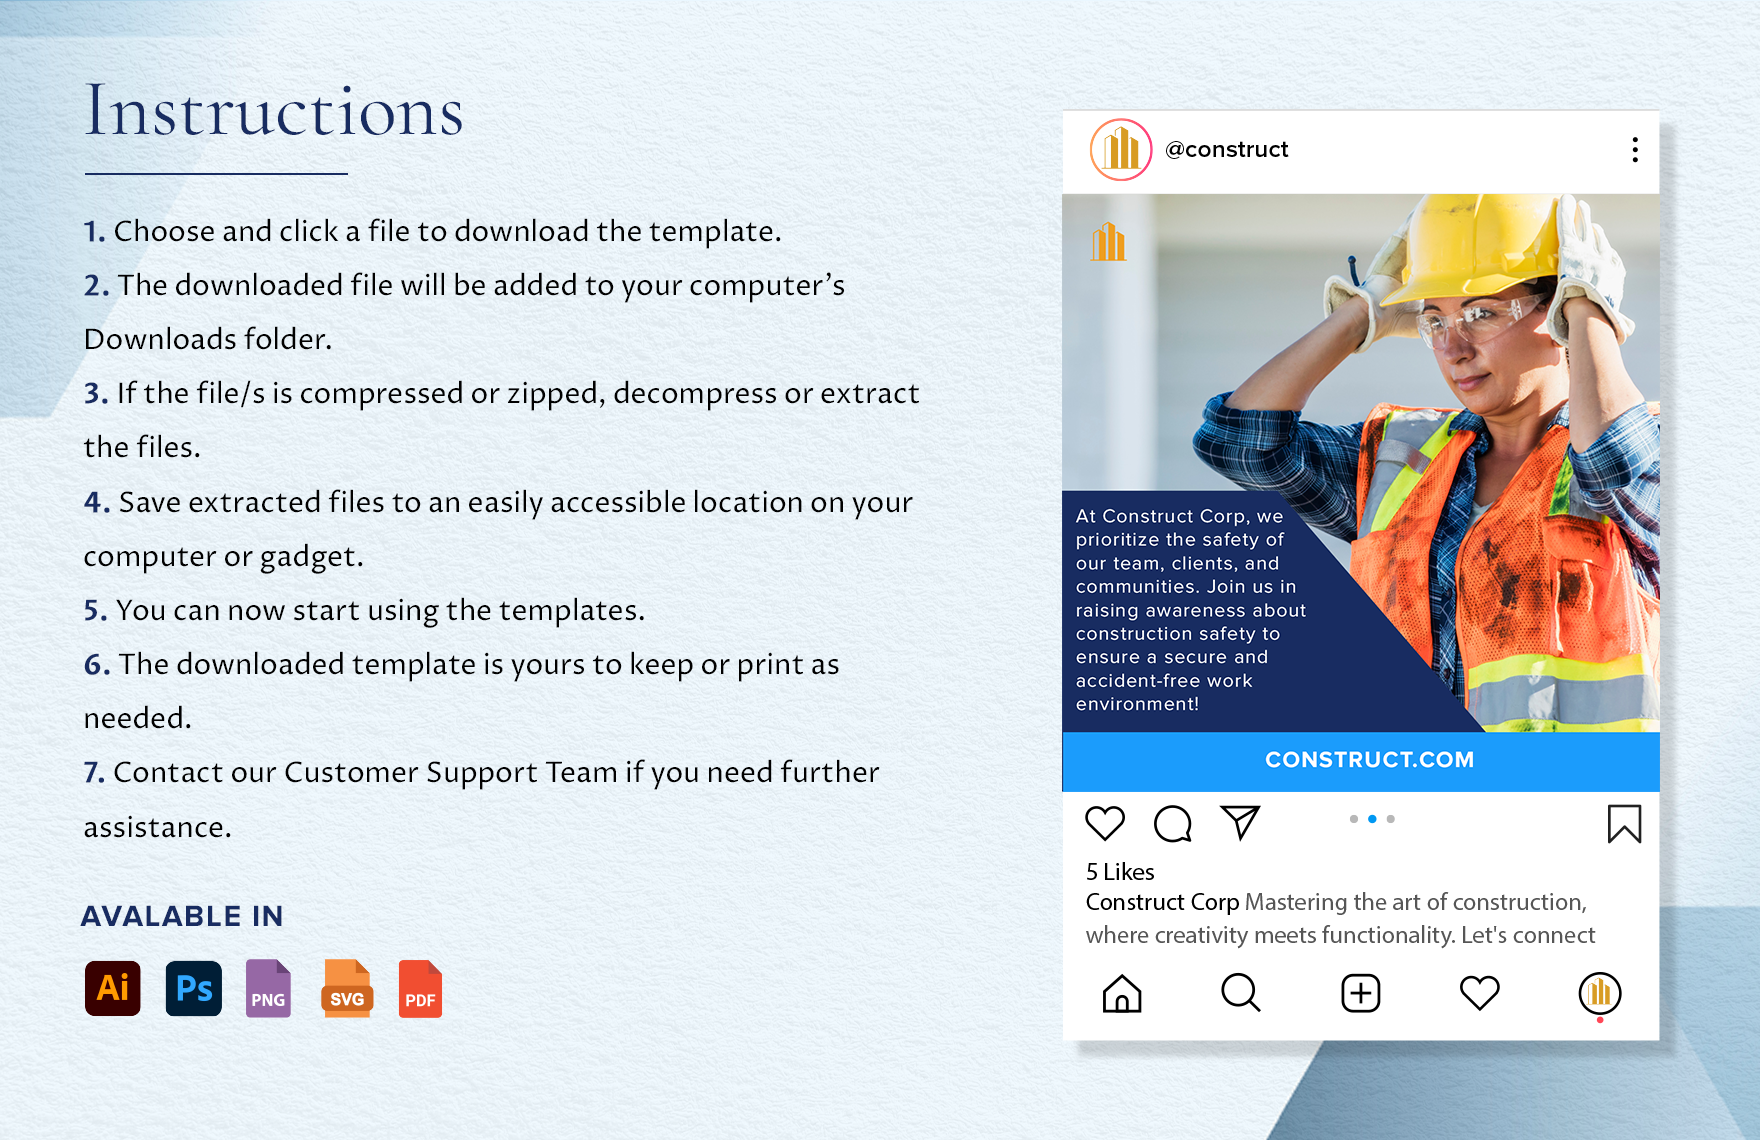 Construction Safety Awareness Instagram Post